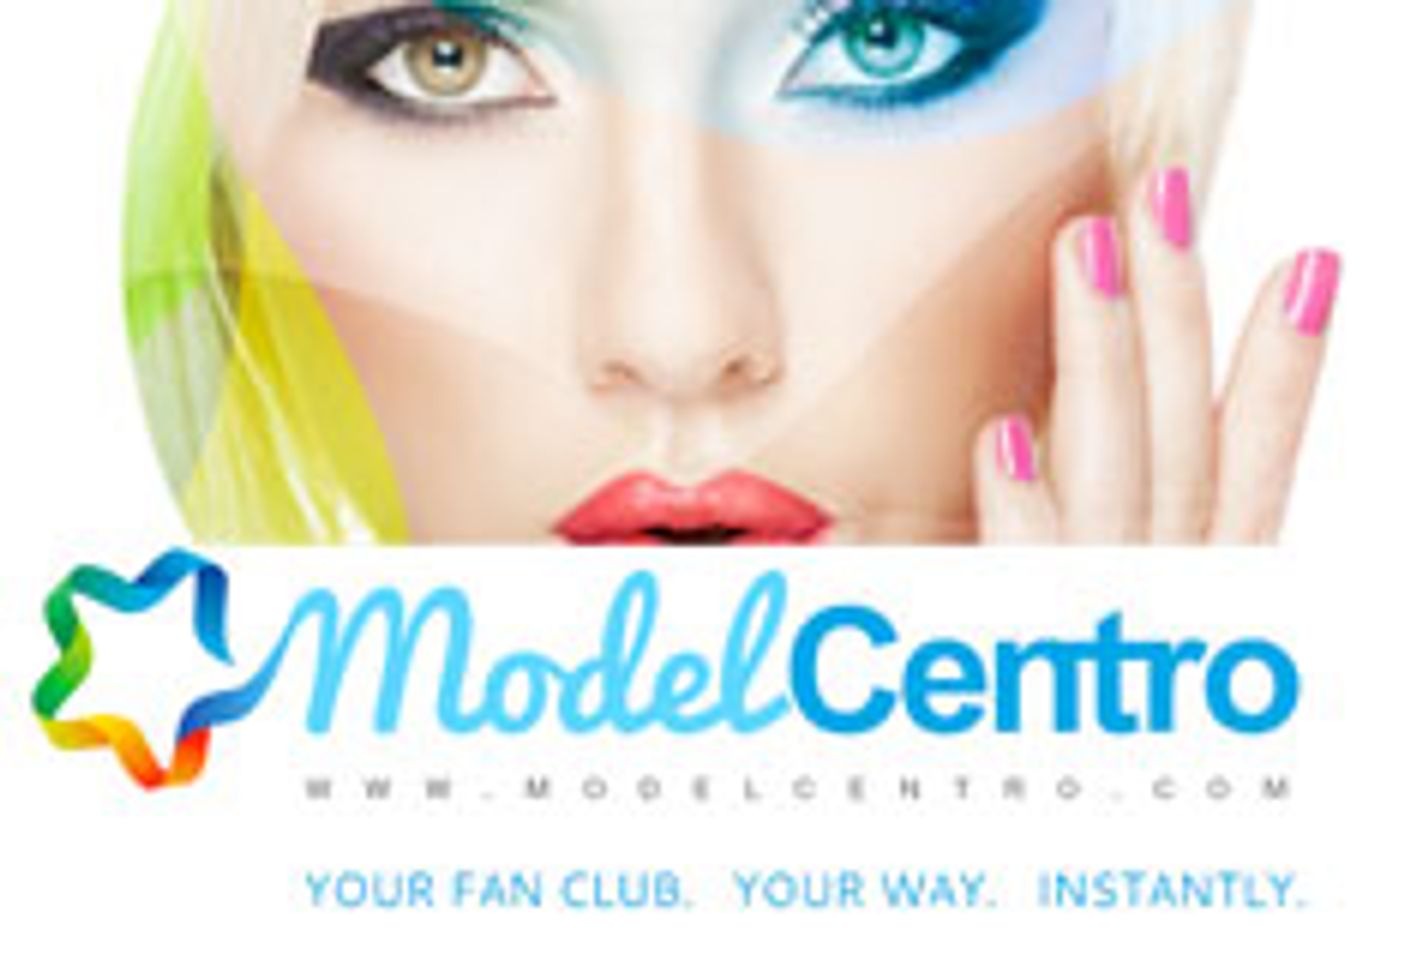 ModelCentro Integrates Paid Call Service